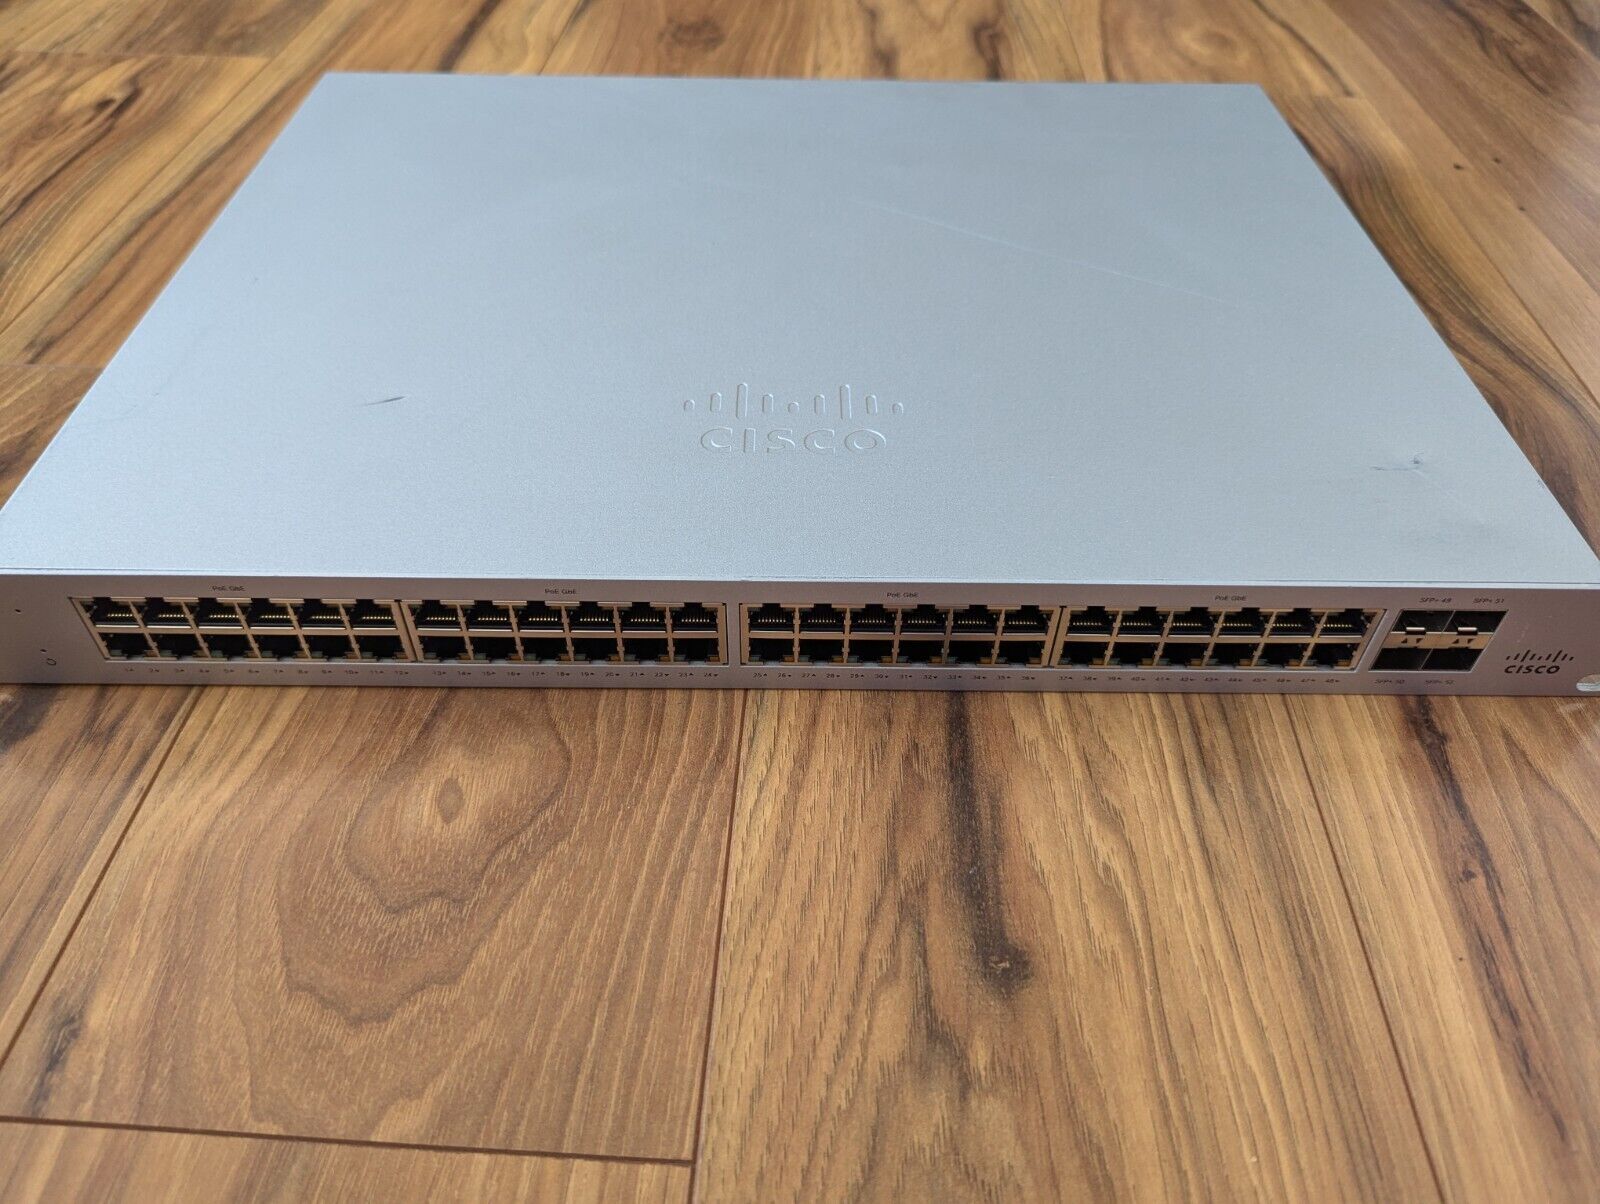 Cisco MS125-48LP - 52 Ports Fully Managed Ethernet Switch Unclaimed 